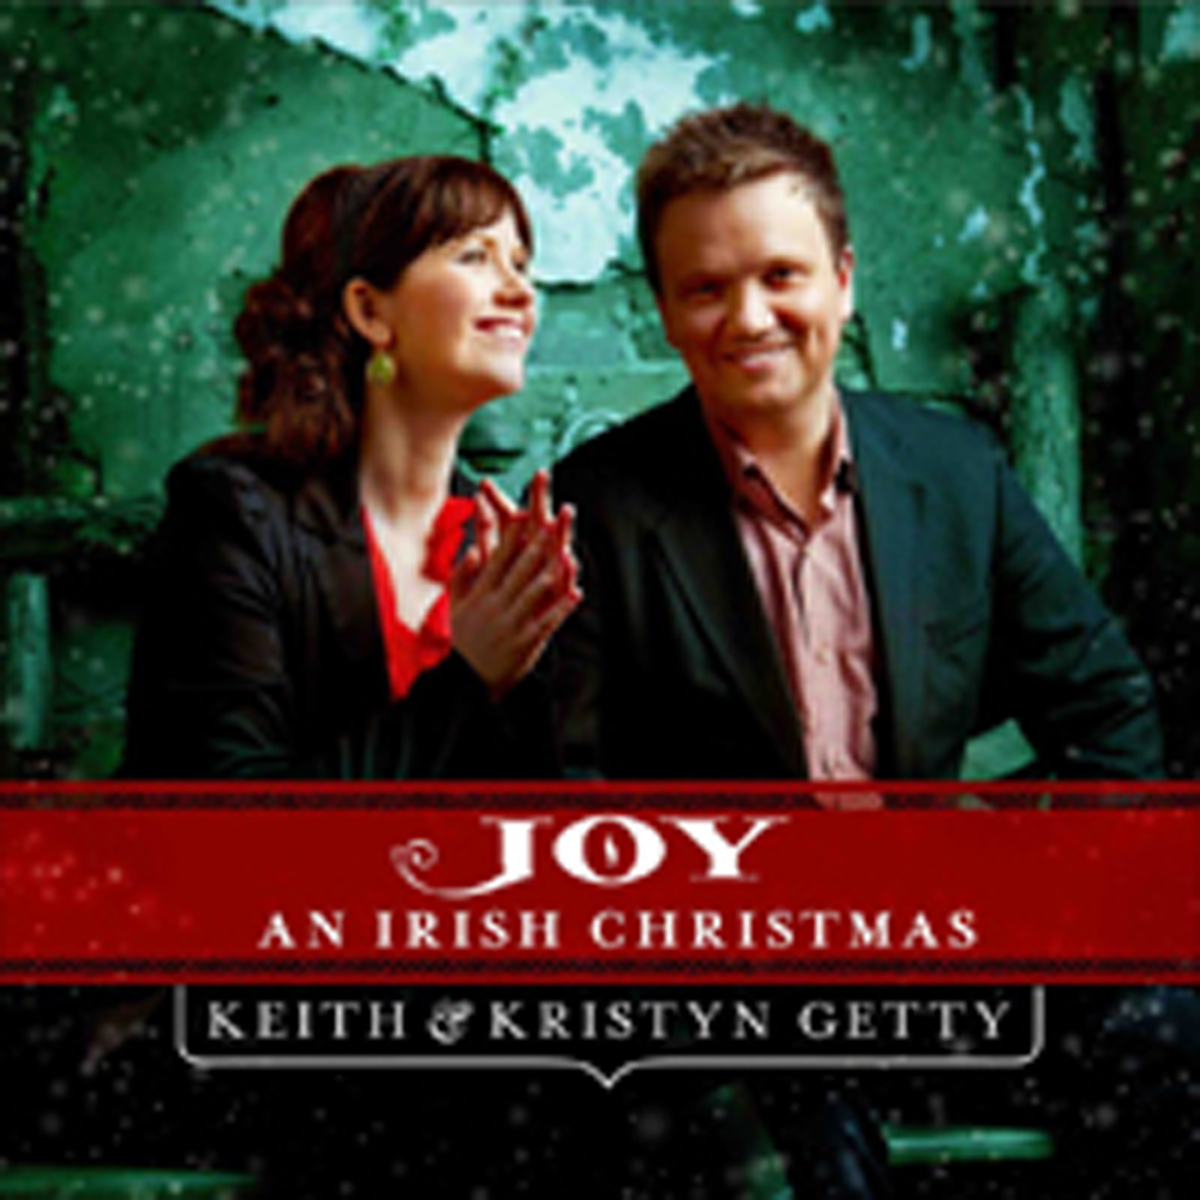 keith and kristyn getty christmas tour 2023